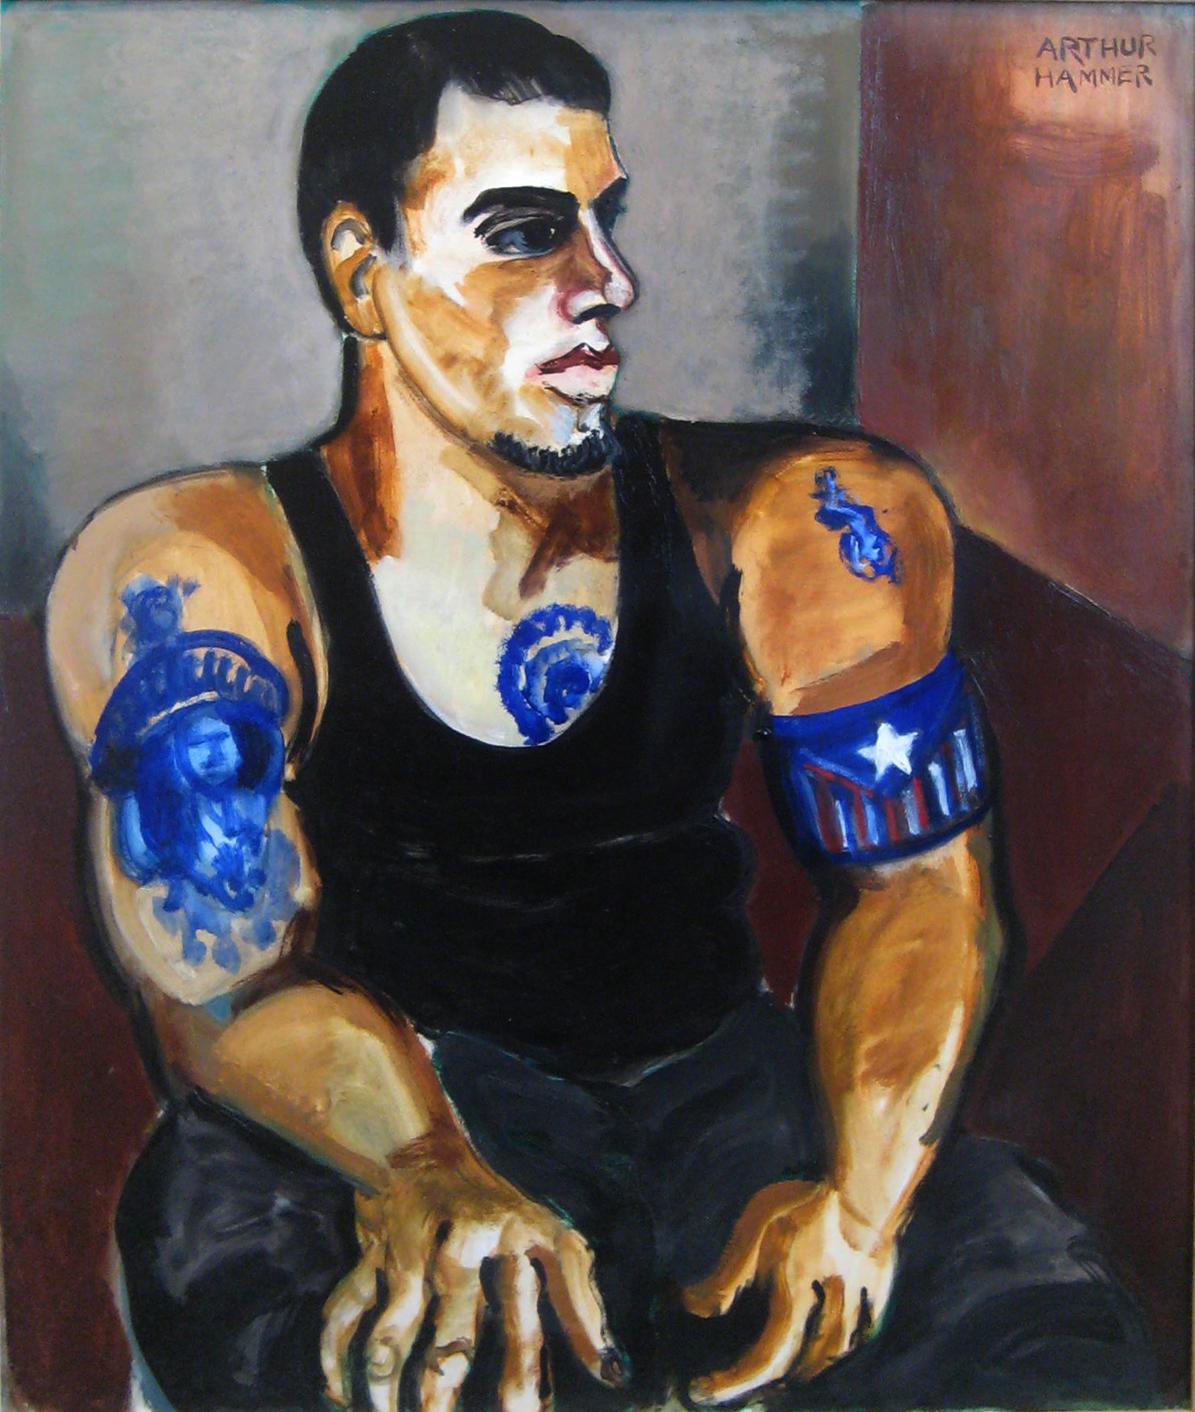 Arthur Hammer Nude Painting - Portrait of Johnny with Tattoos (Male seated w/ tattoos of Puerto Rican Flag)